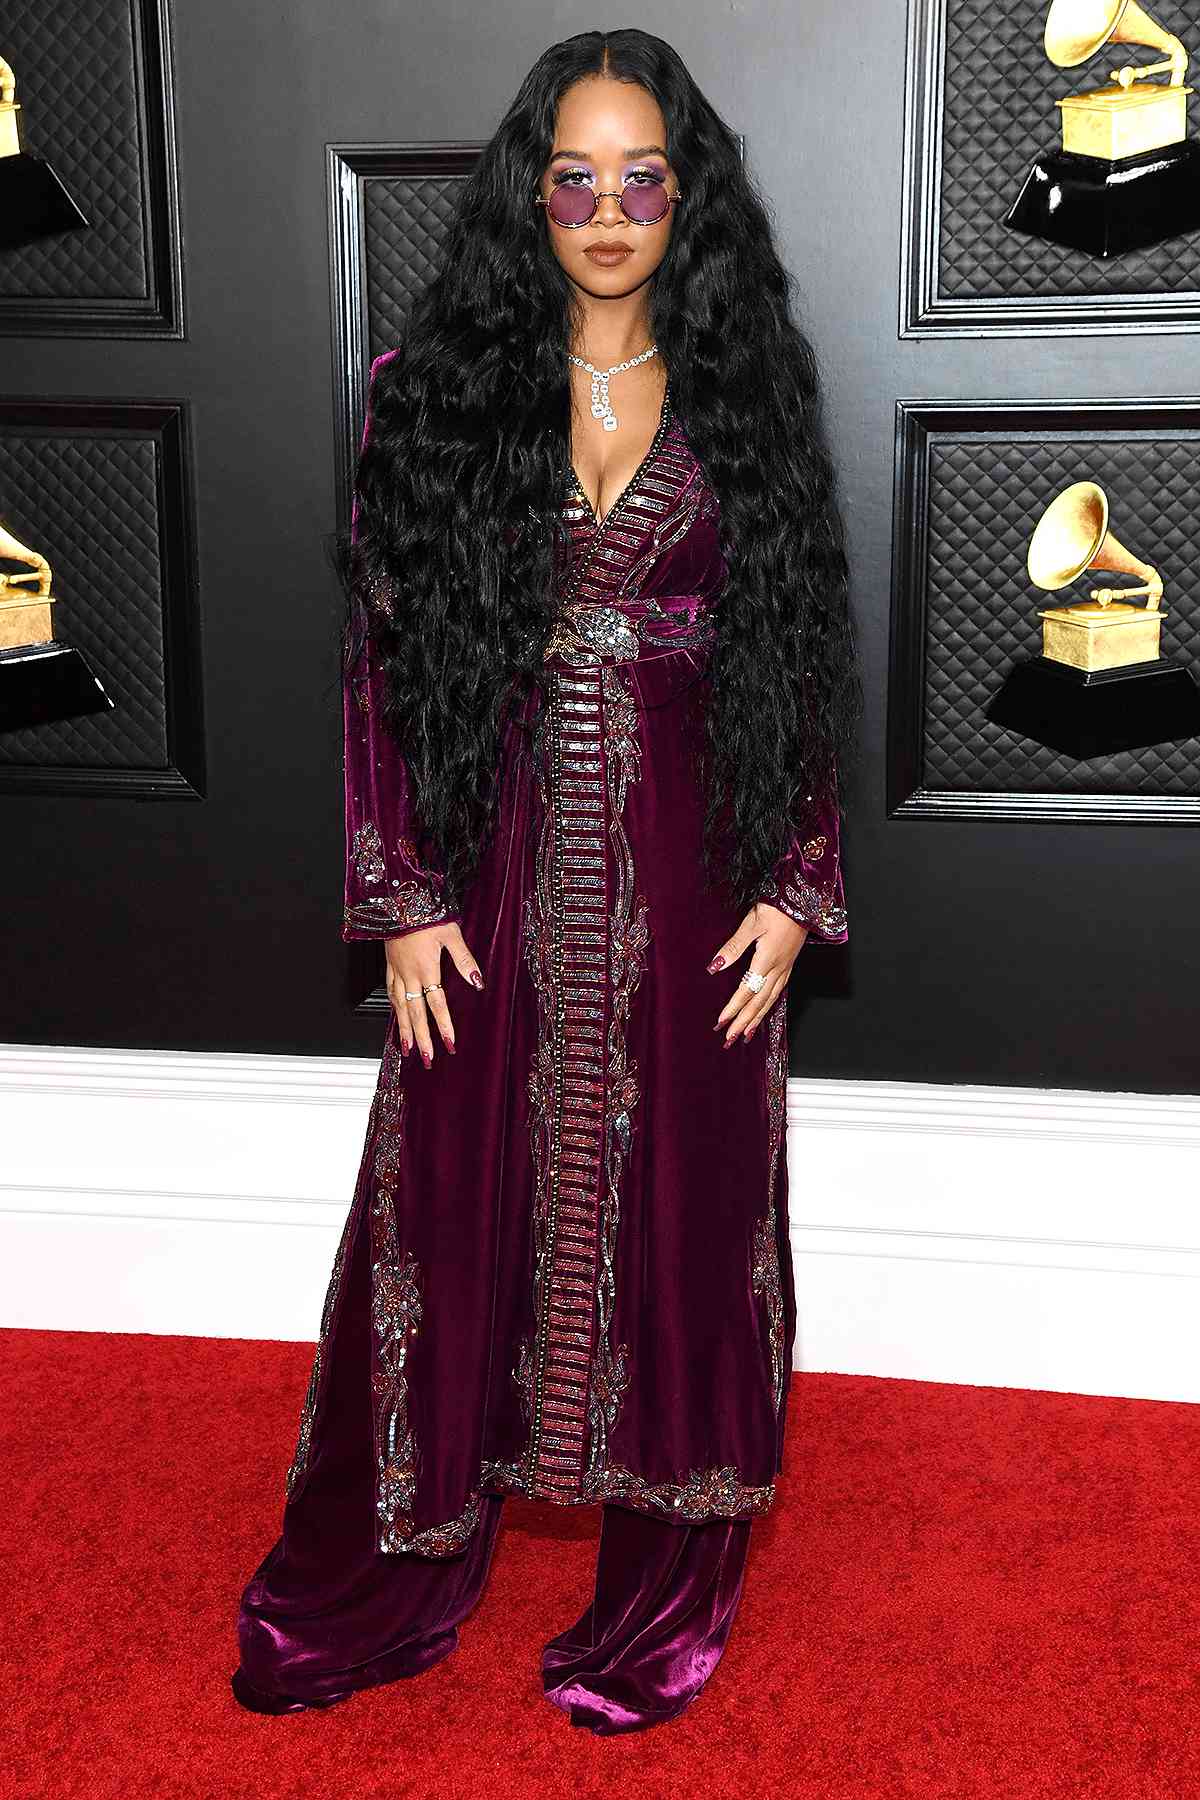 H.E.R. attends the 63rd Annual GRAMMY Awards at Los Angeles Convention Center on March 14, 2021